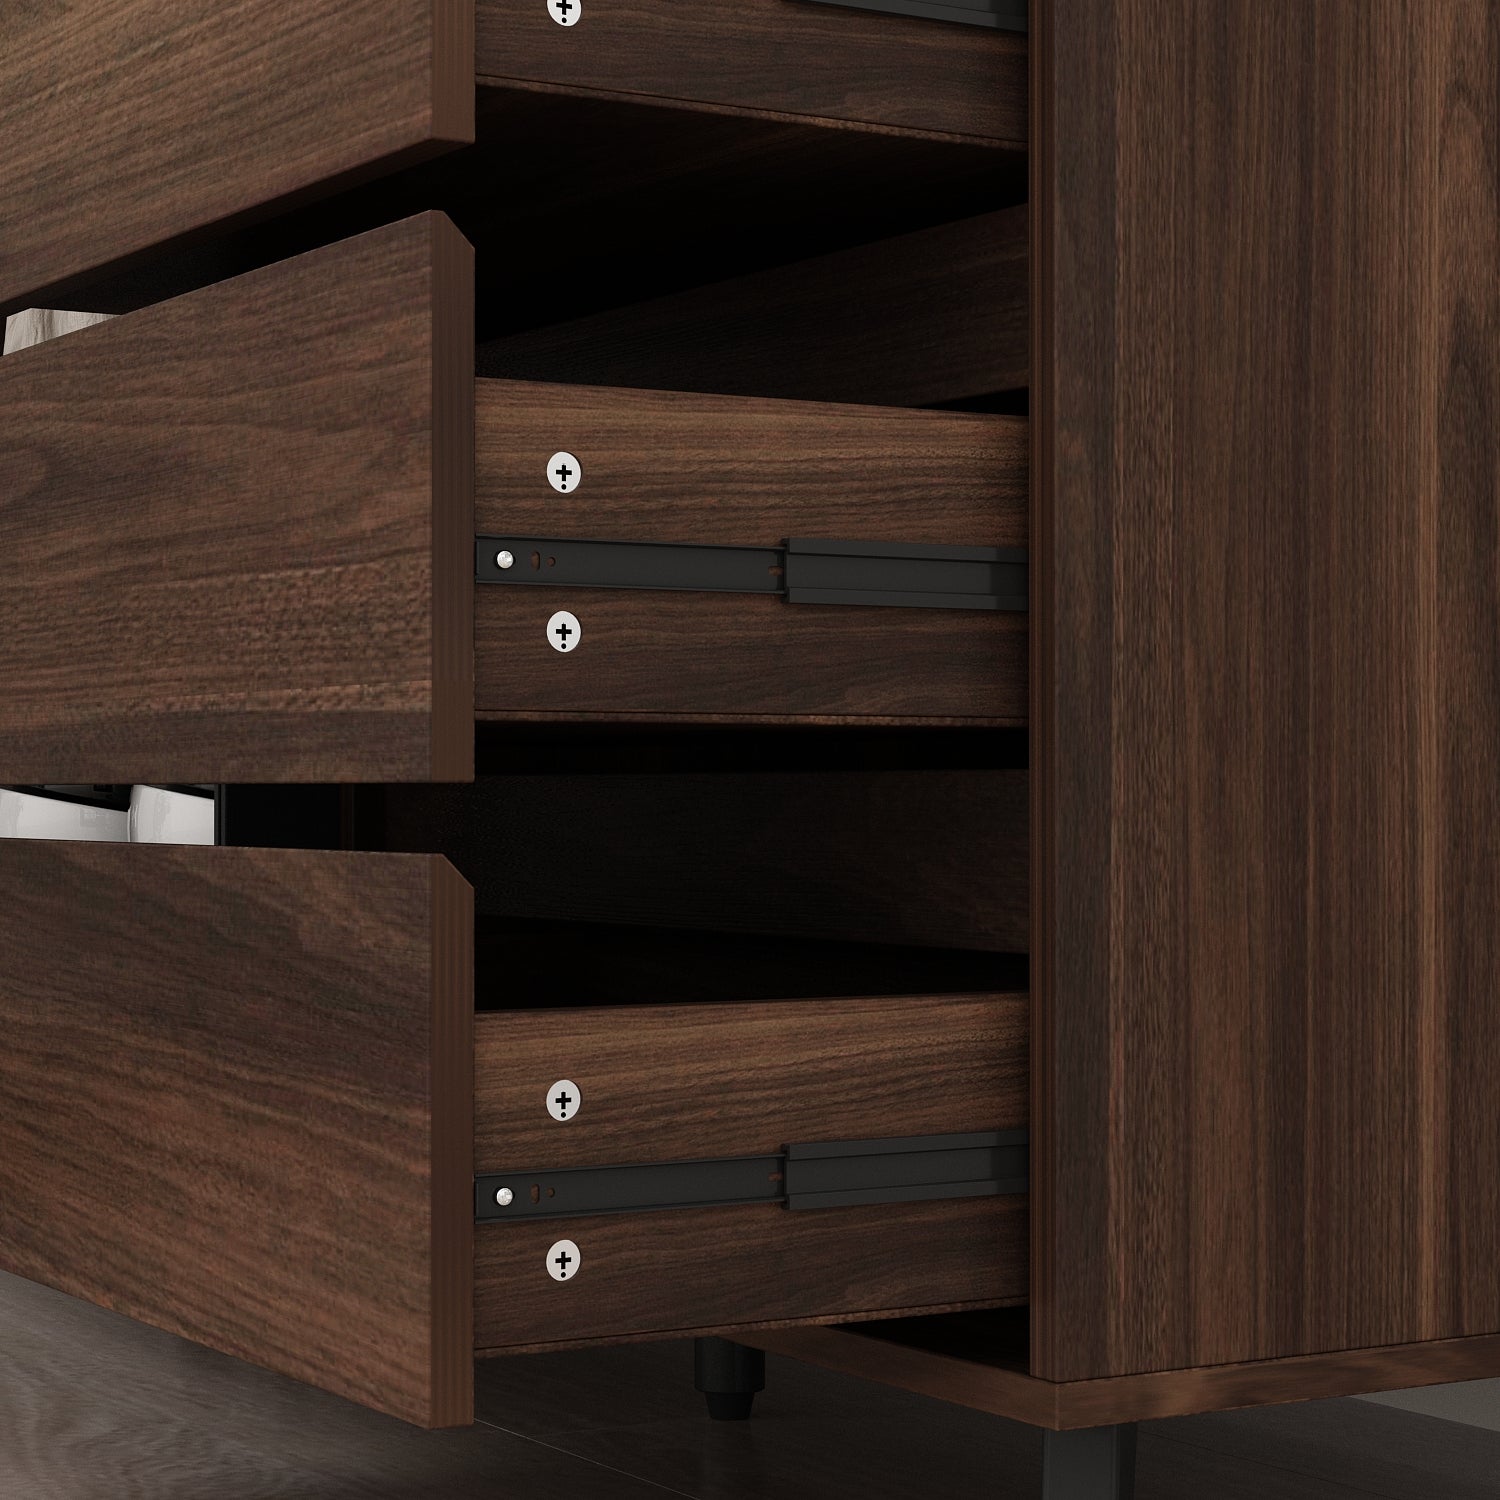 Storage Sideboard Cabinet Cupboard with Drawers and Glass Doors for Kitchen Organization